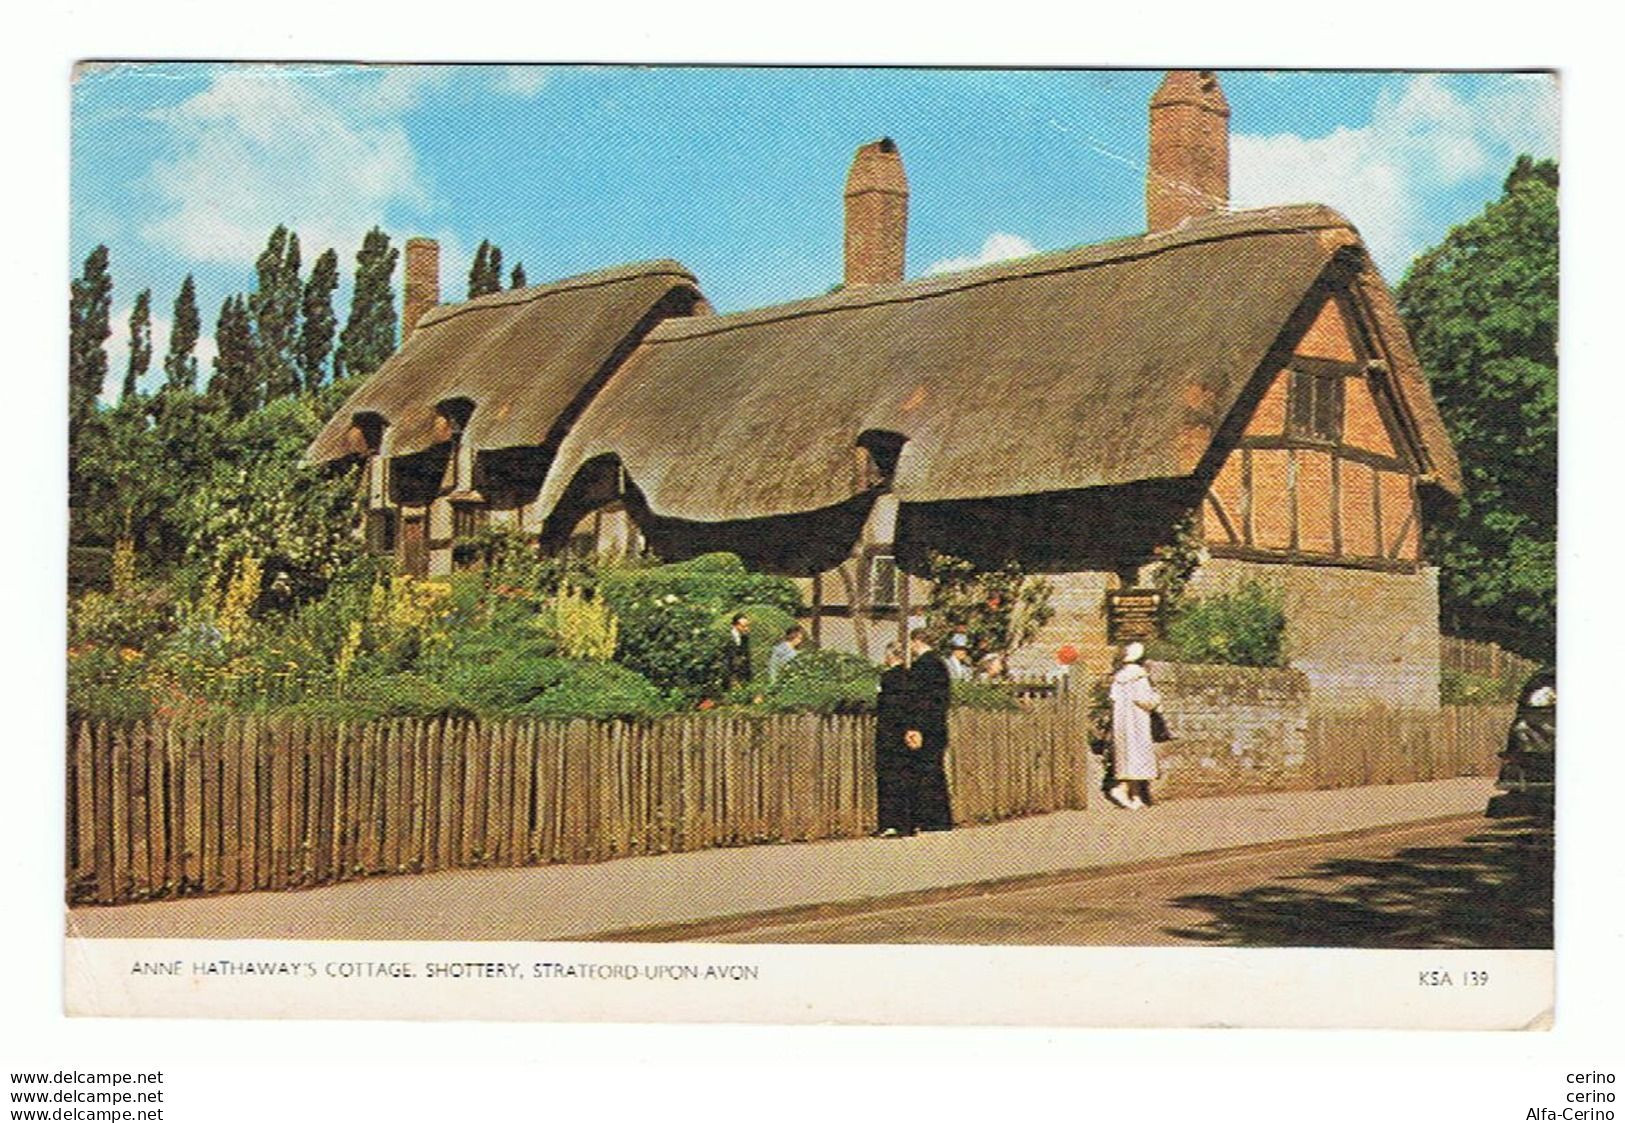 STRATFORD  UPON  AVON:  ANNE  HATHAWAY'S  COTTAGE  -  SHOTTERY  -  TO  ITALY  -  FP - Stratford Upon Avon